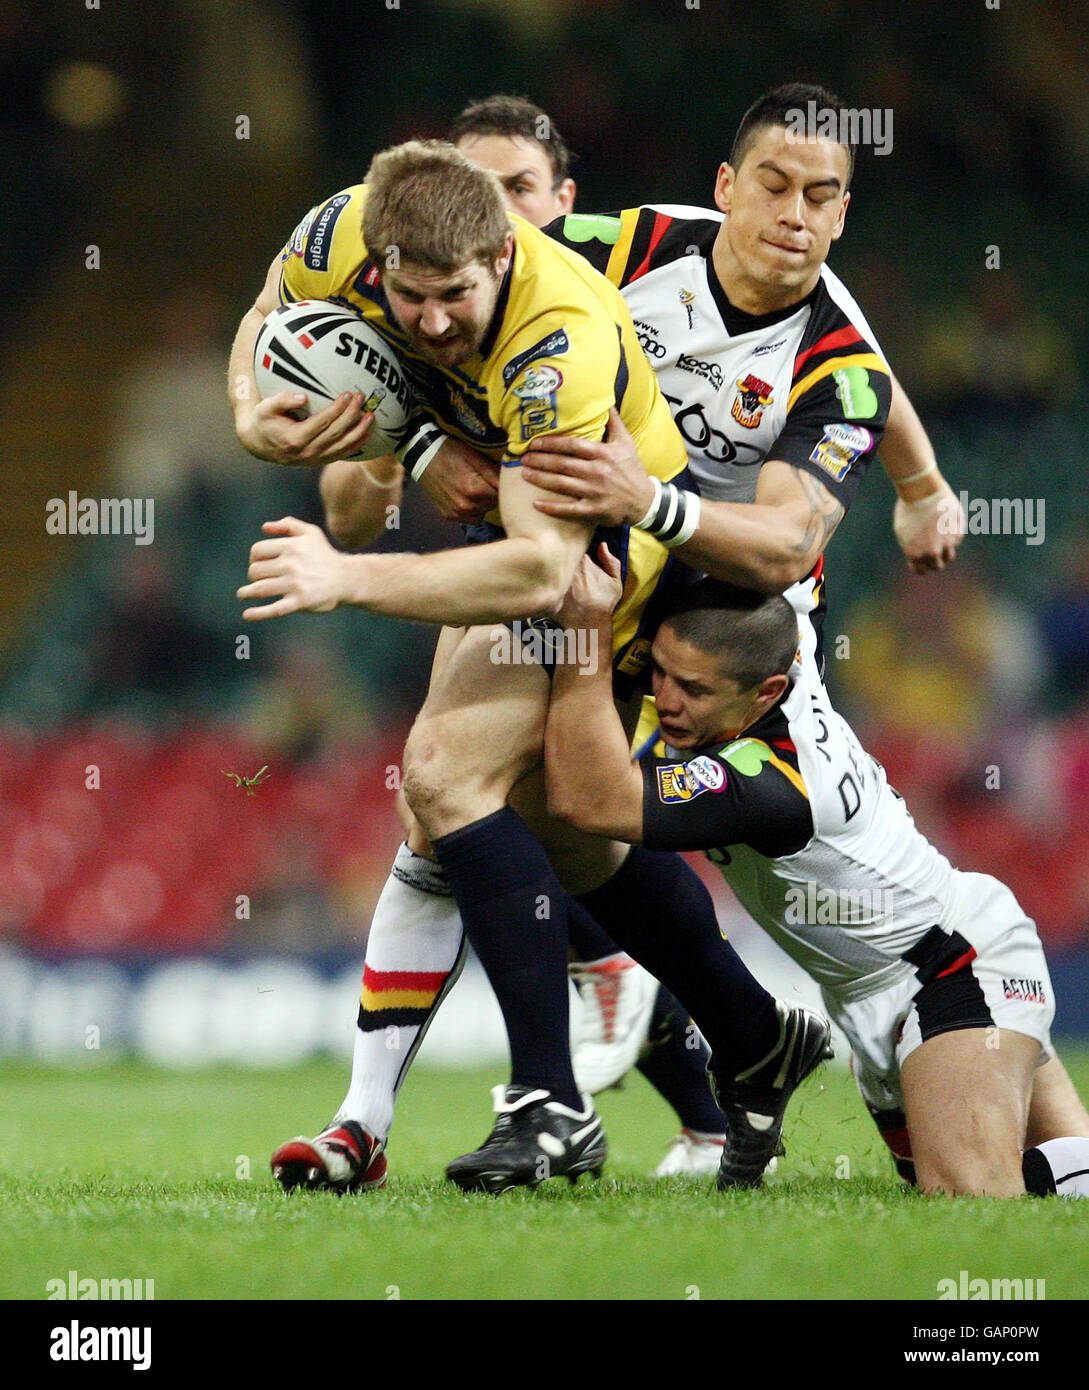 Bradford Bulls Shontayne Hape and Paul Deacon tackle Leeds Rhinos Nick Scrutton during the engage Super League match at the Millennium Stadium, Cardiff. Stock Photo